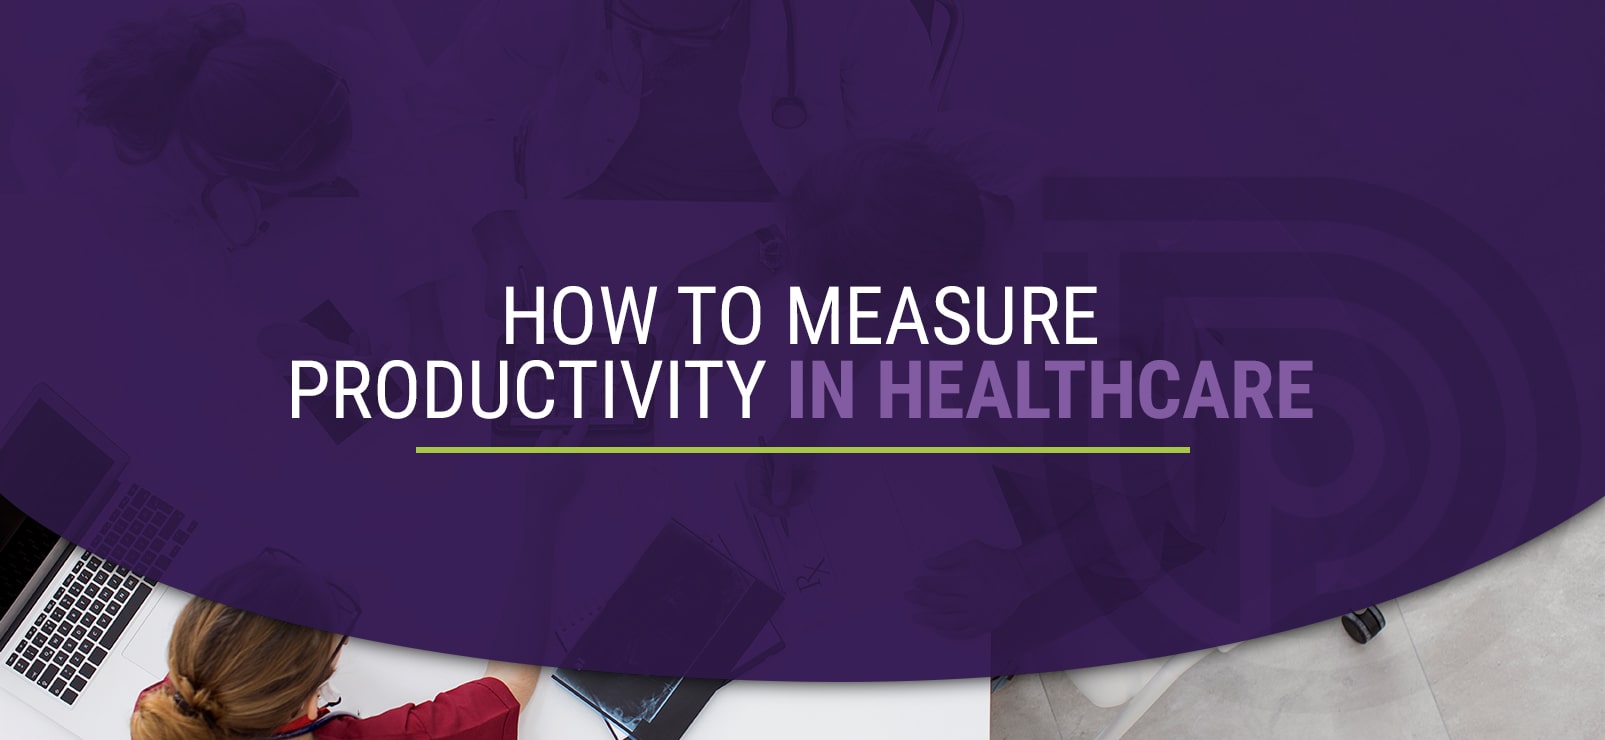 how to measure productivity in healthcare